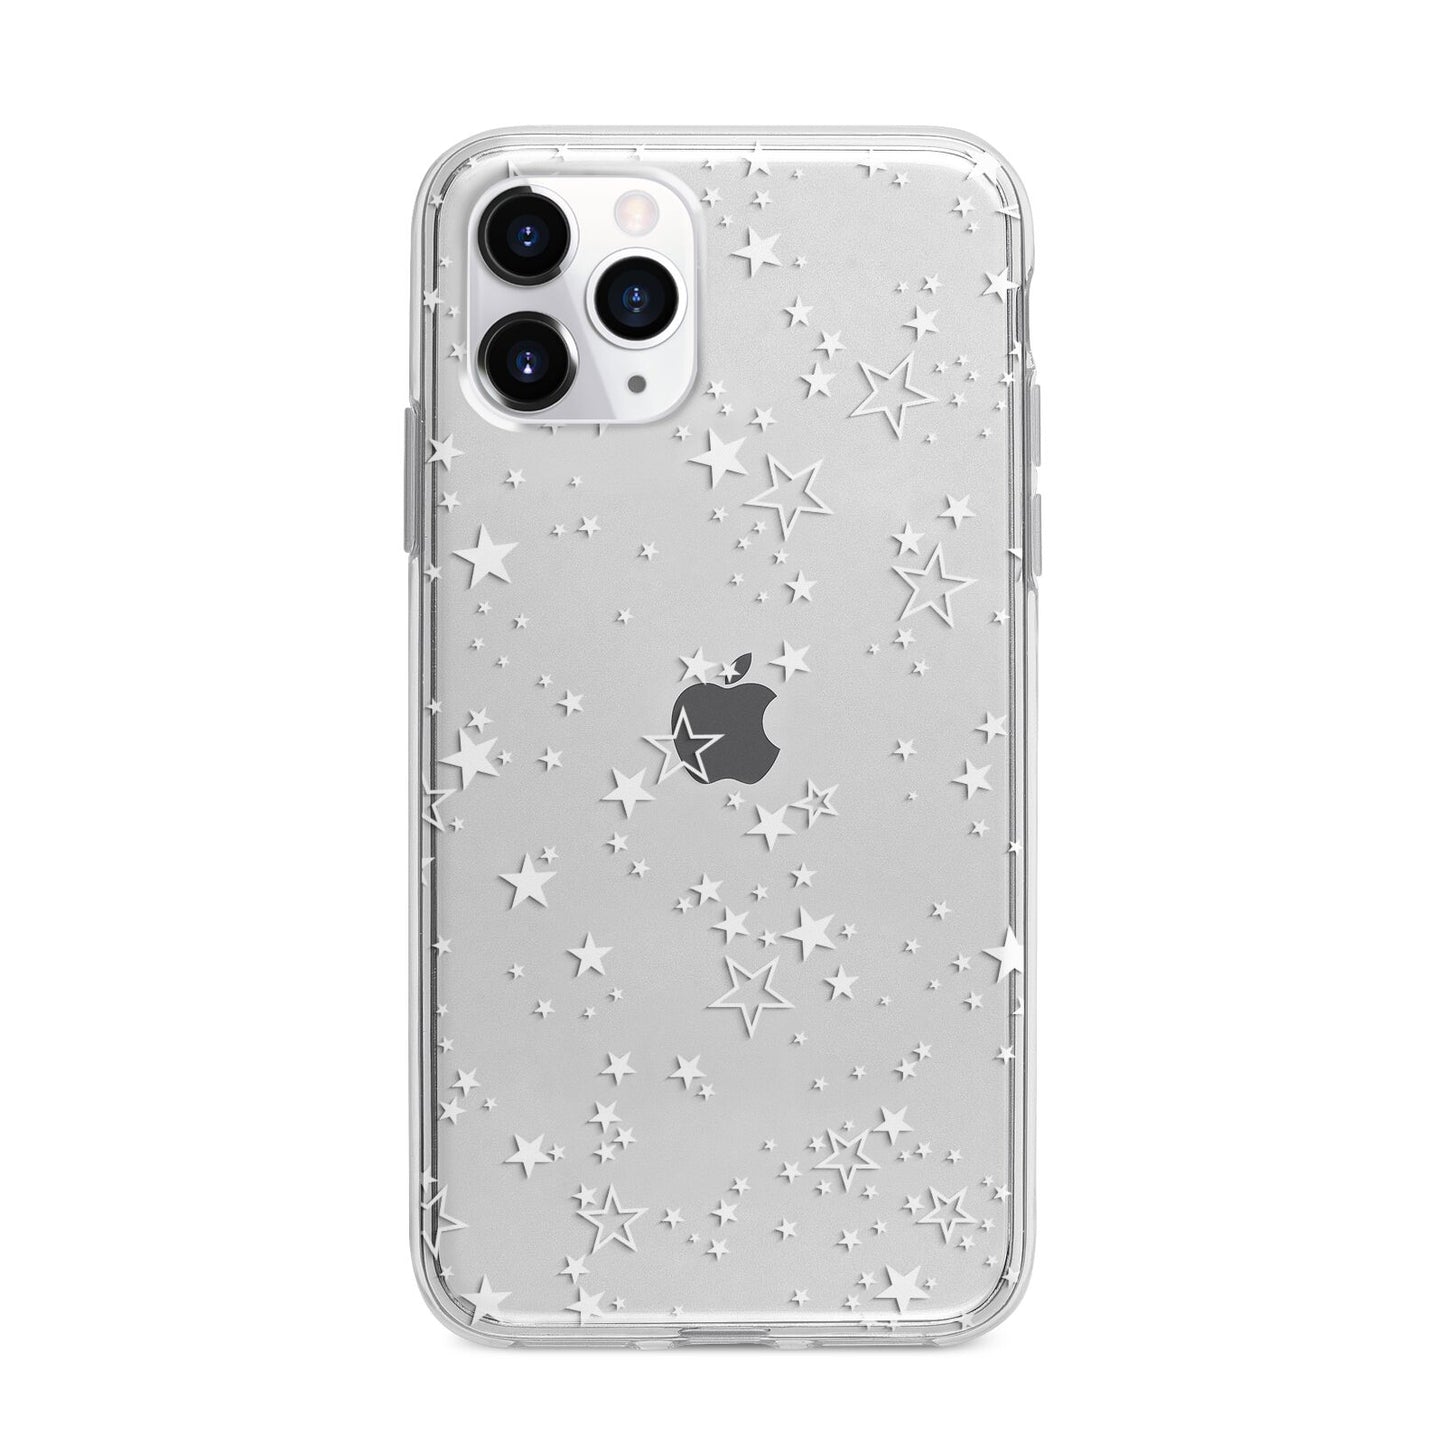 White Star Apple iPhone 11 Pro Max in Silver with Bumper Case